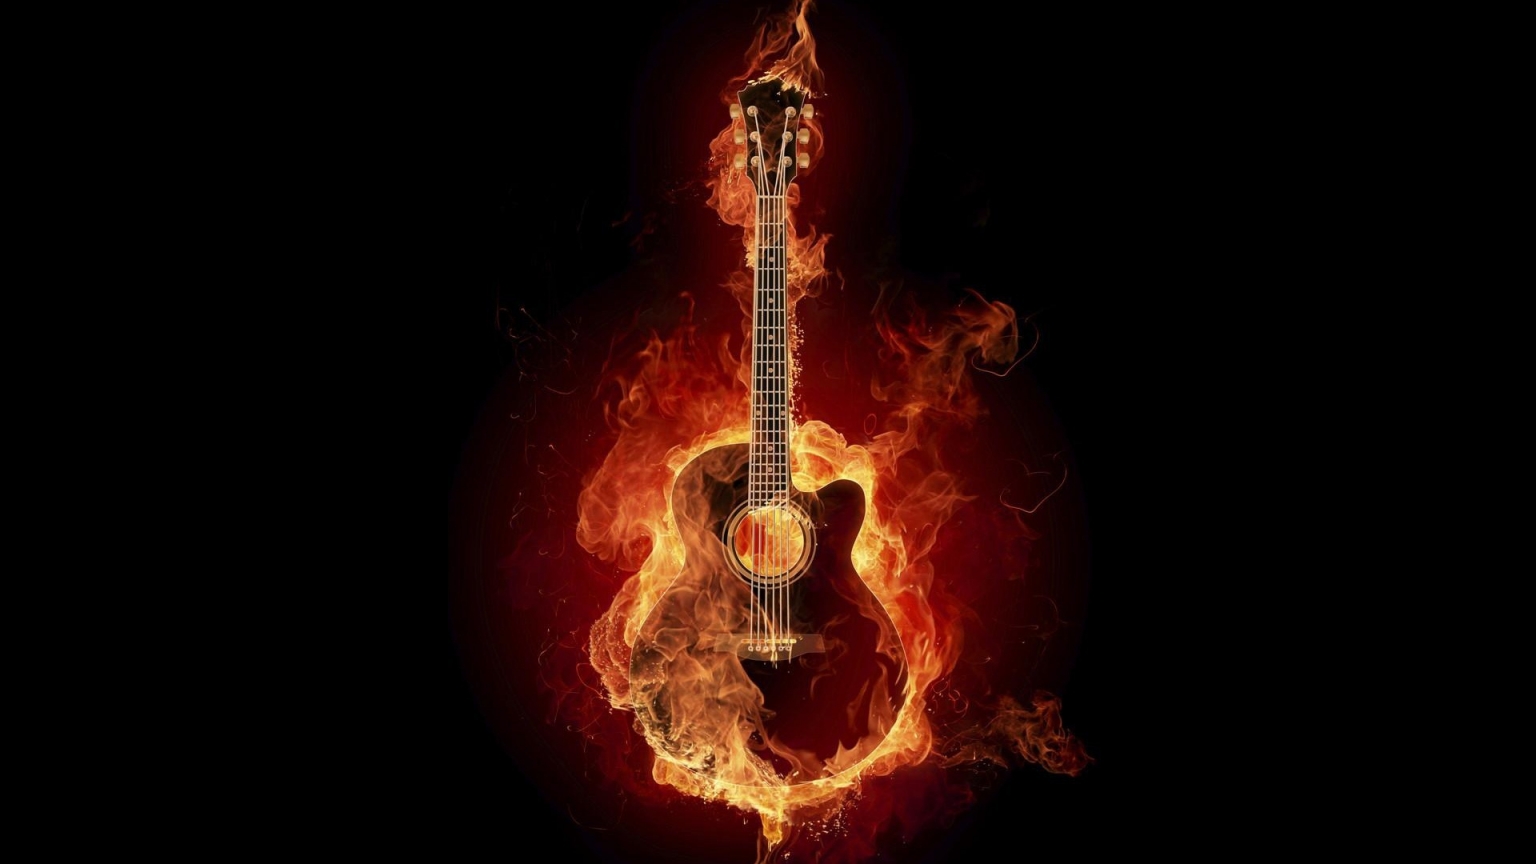 Great Fire Guitar for 1536 x 864 HDTV resolution